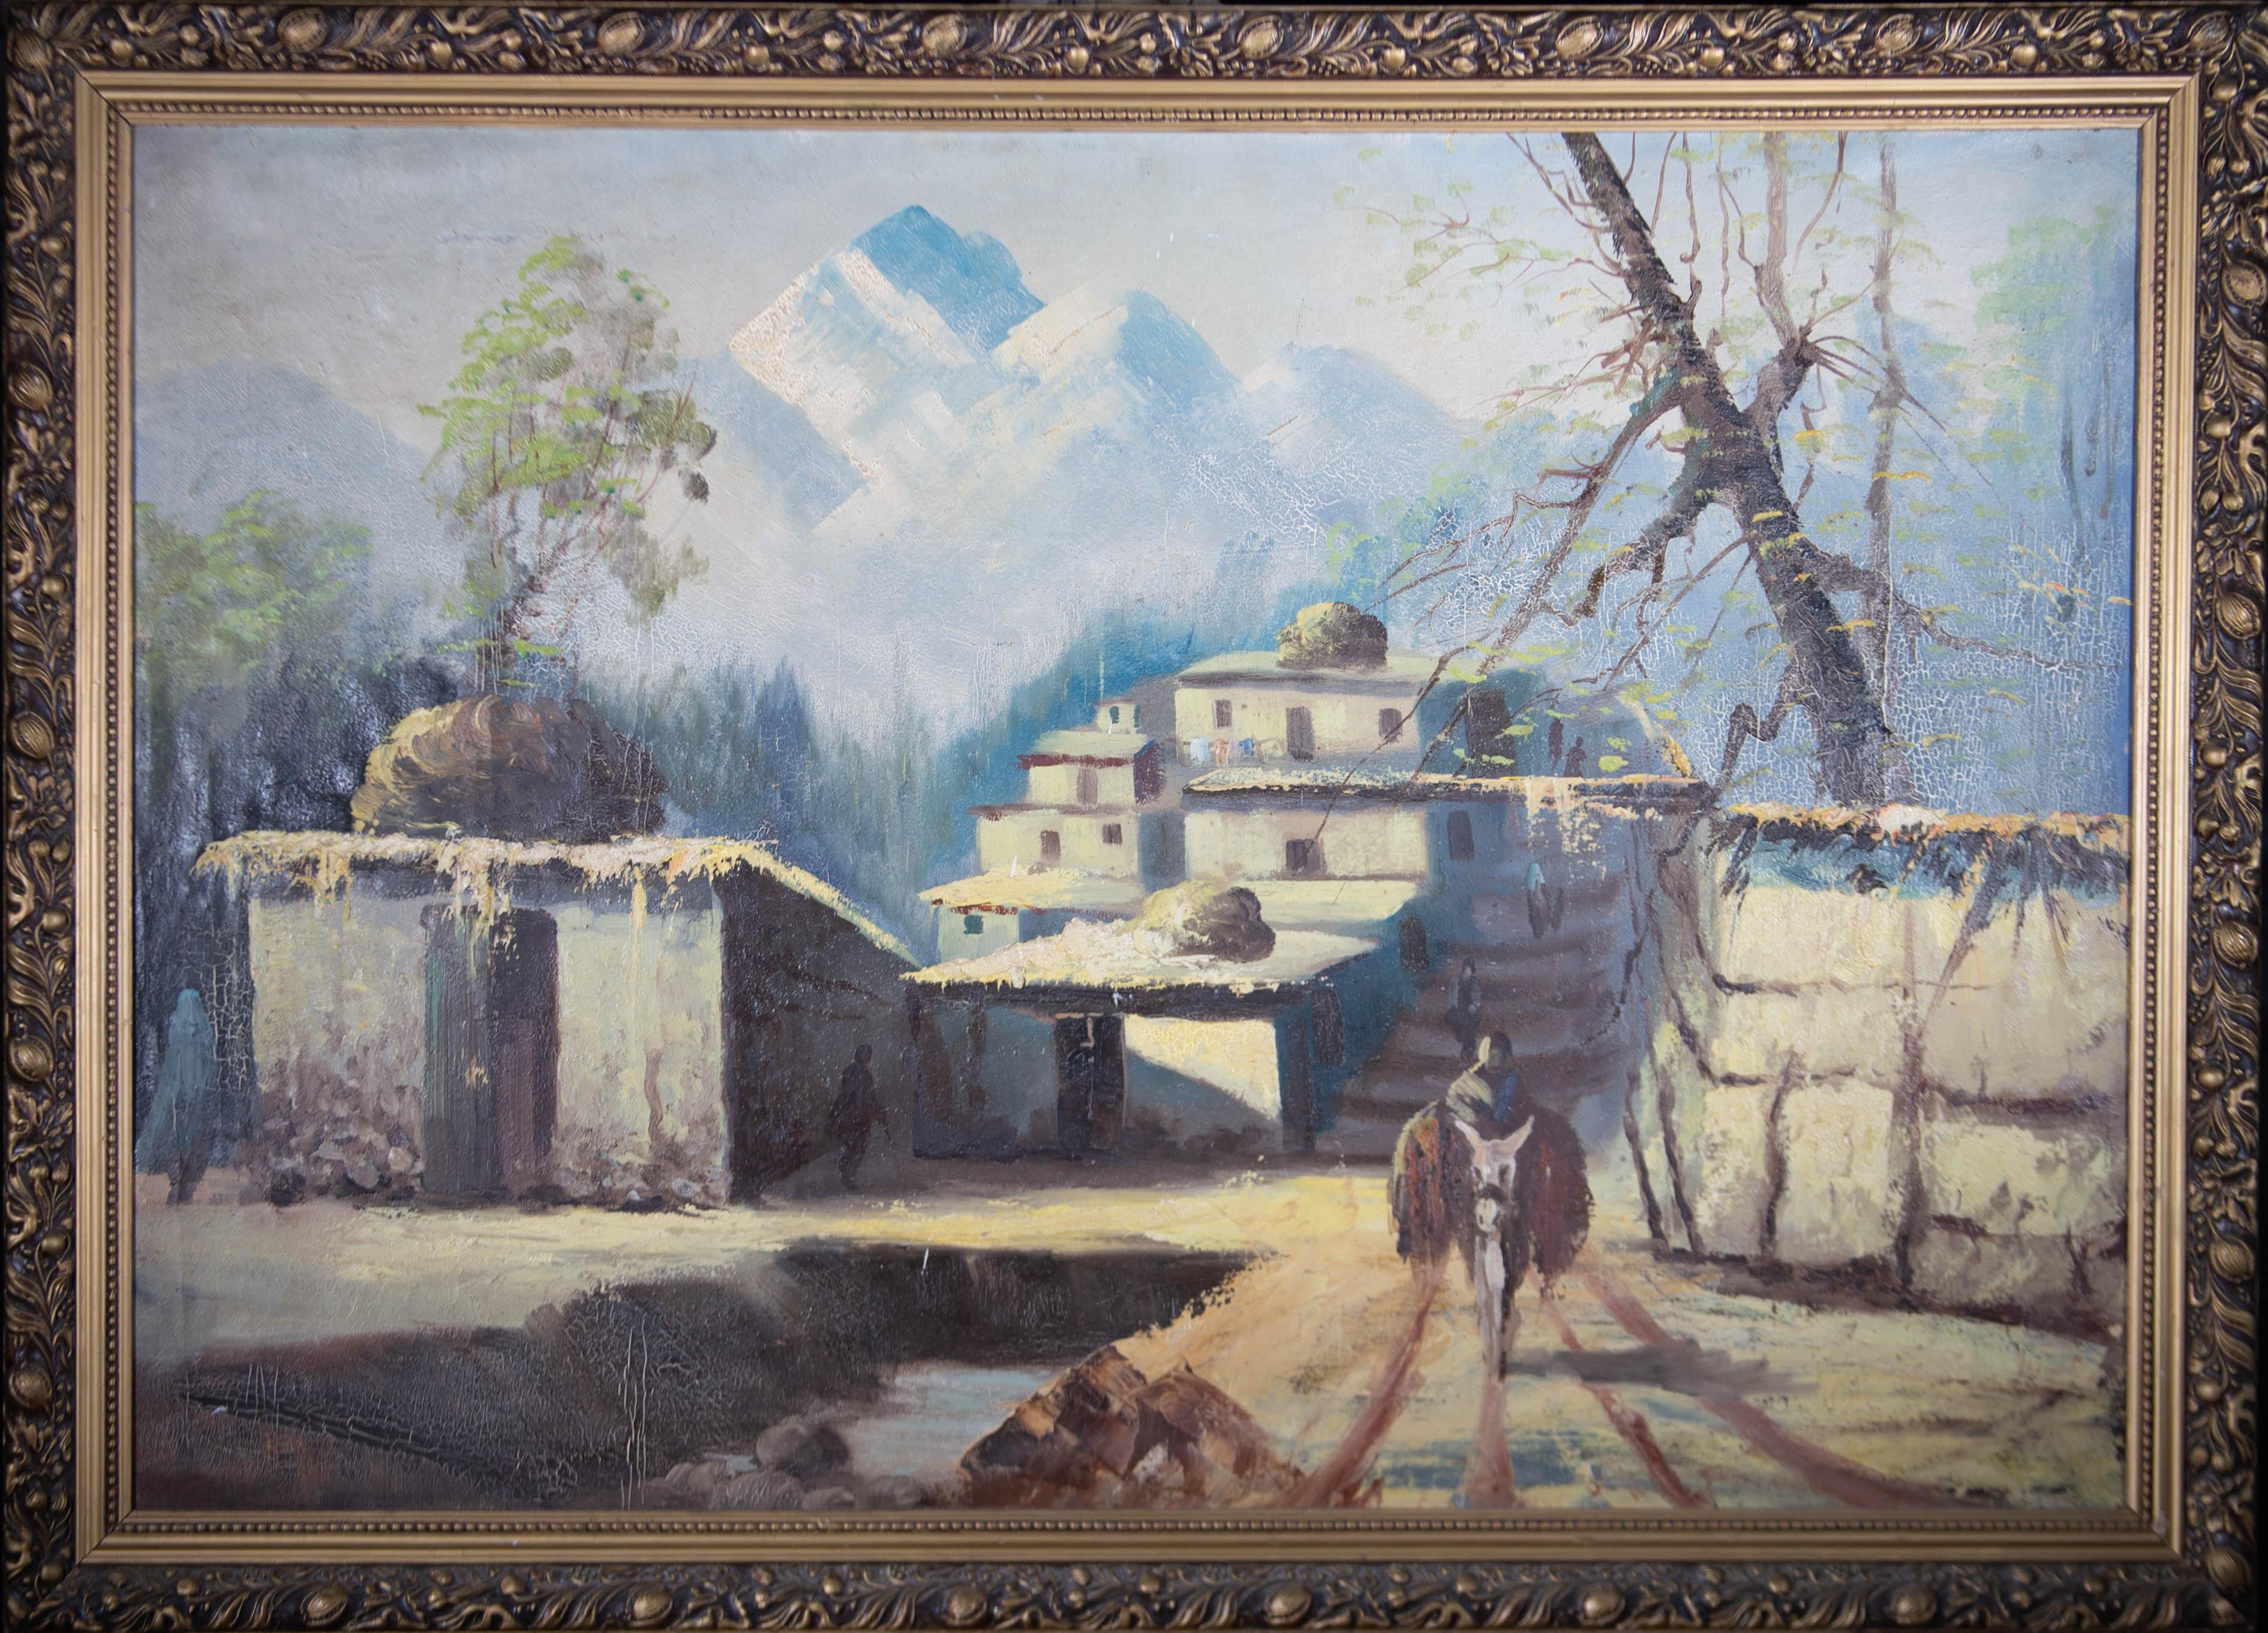 Unknown Landscape Painting - 20th Century Oil - Middle Eastern Village Scene